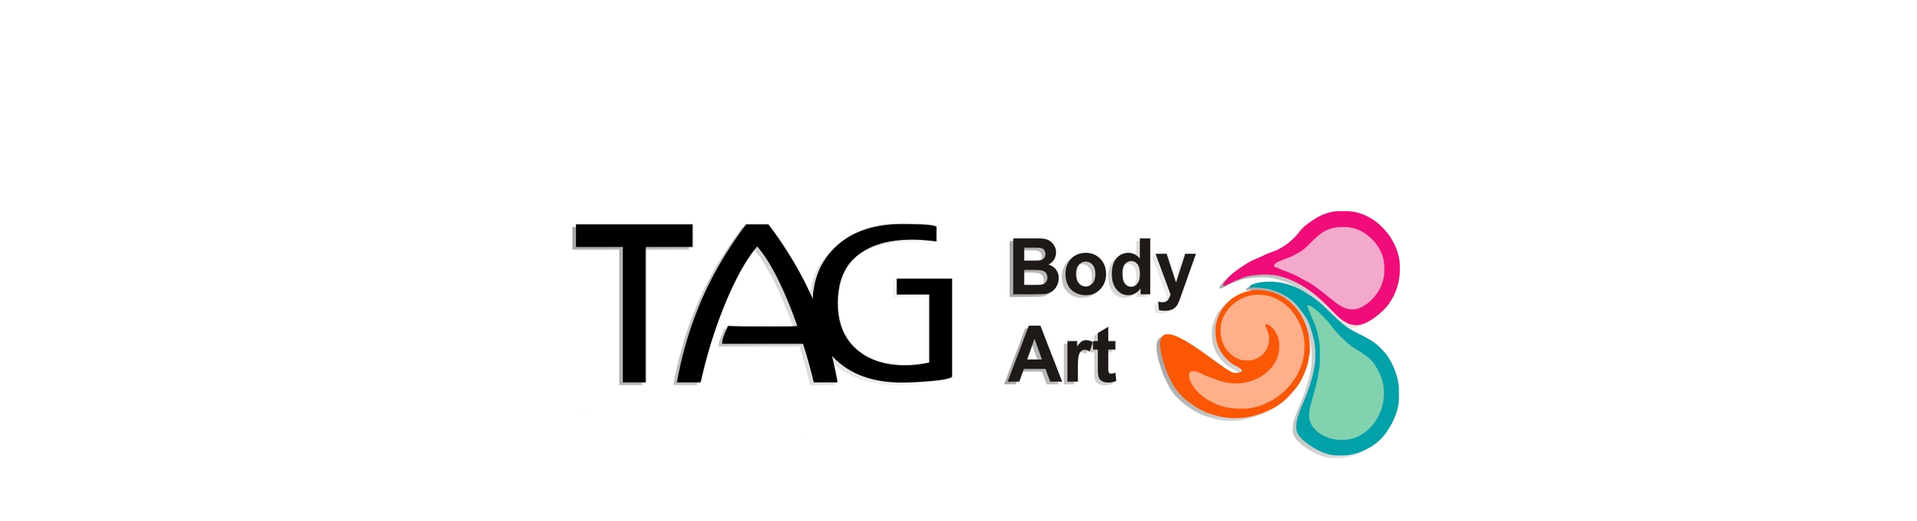 Welcome to TAG Body Art!